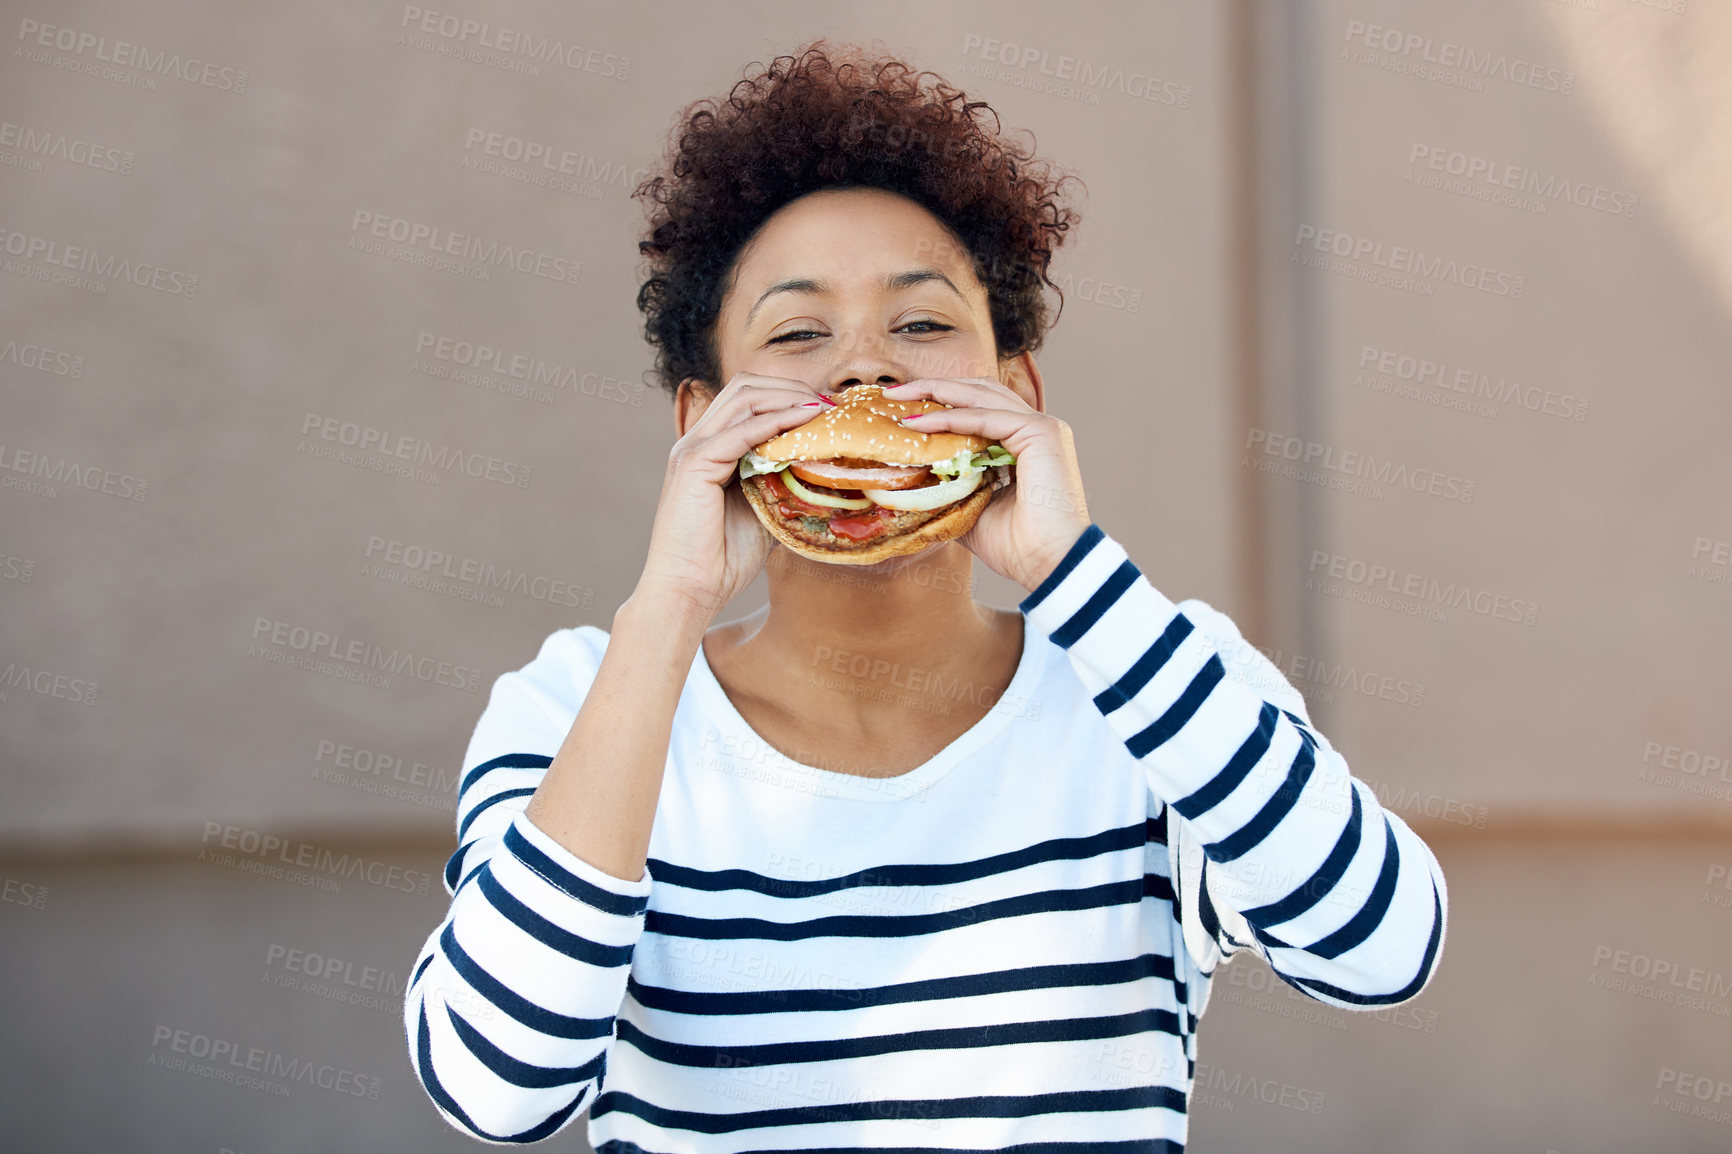 Buy stock photo Portrait of a young woman eating a hamburger